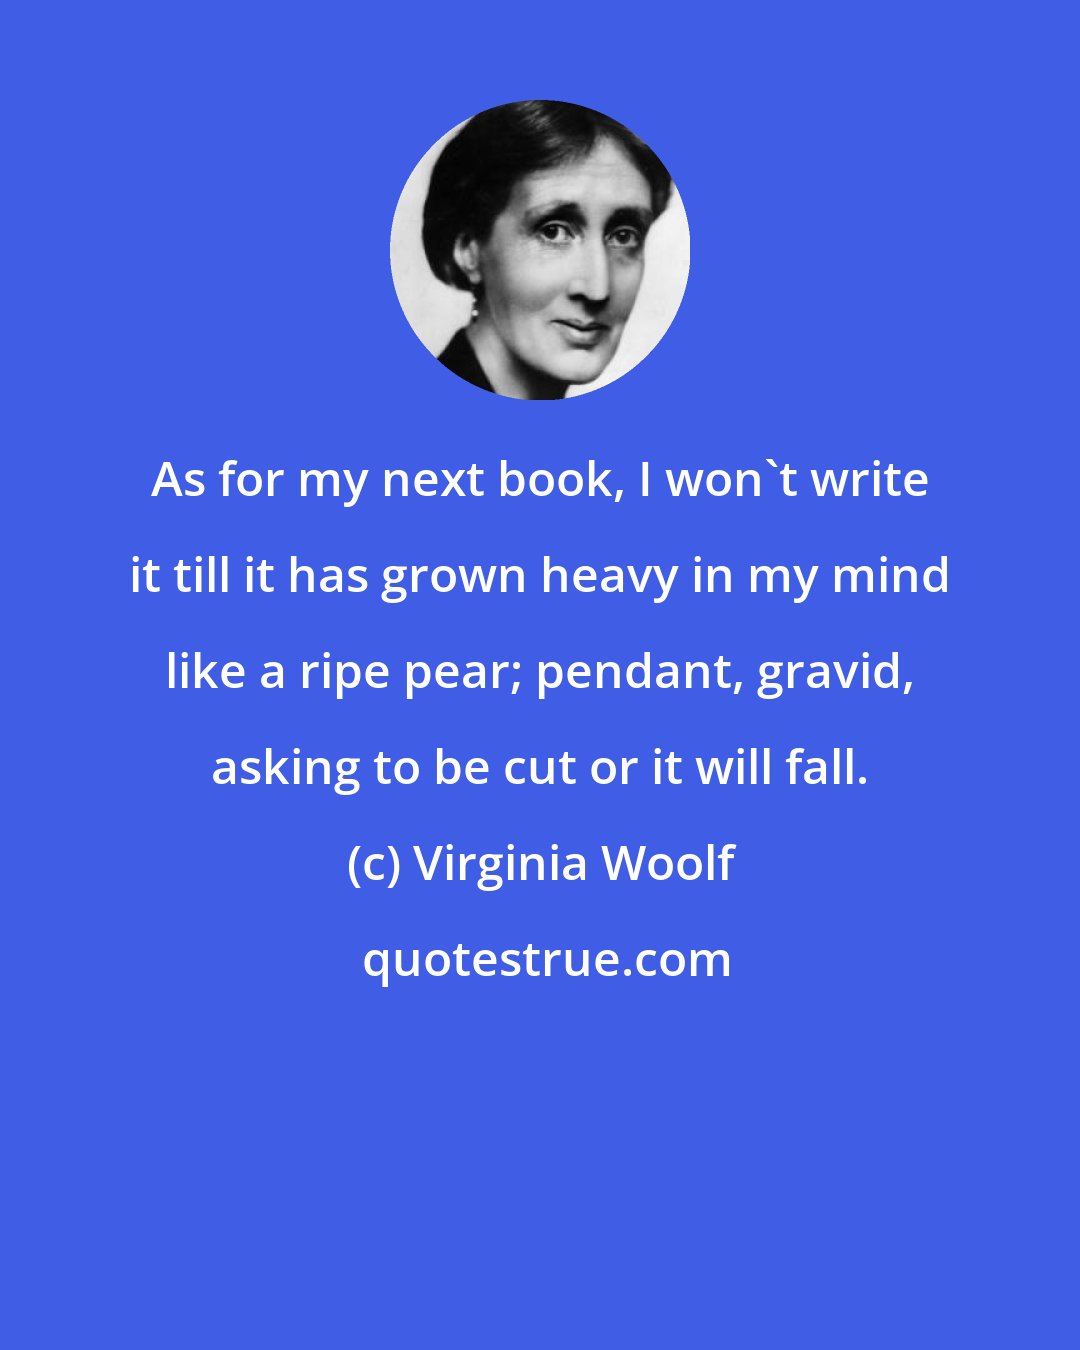 Virginia Woolf: As for my next book, I won't write it till it has grown heavy in my mind like a ripe pear; pendant, gravid, asking to be cut or it will fall.